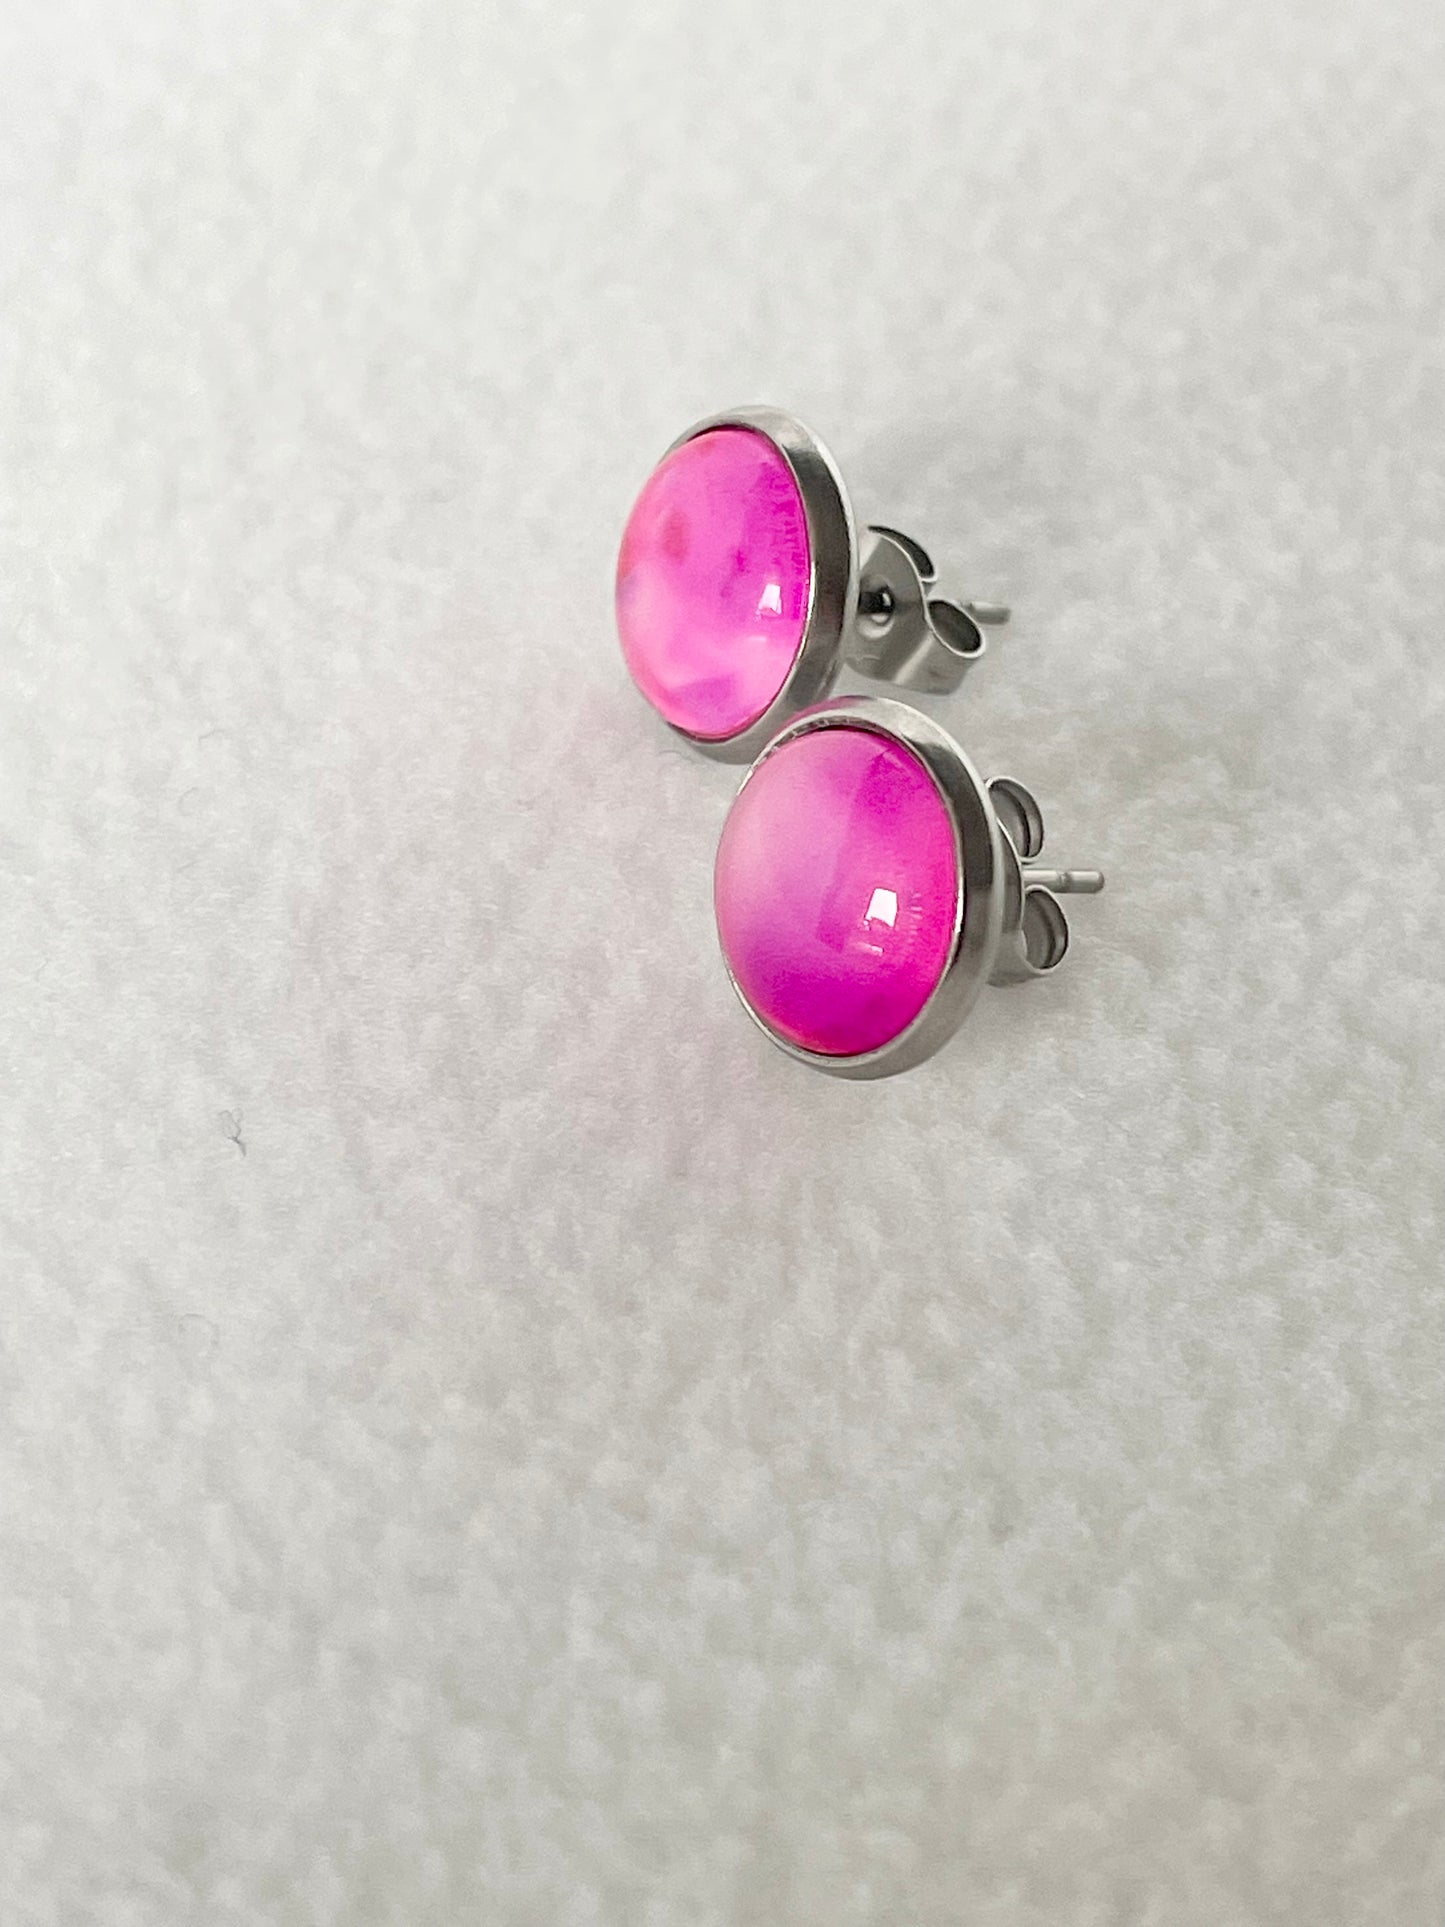 Hand Painted Stud Earrings in Pink Acrylic Art Pour Paint with Glass Cabochons